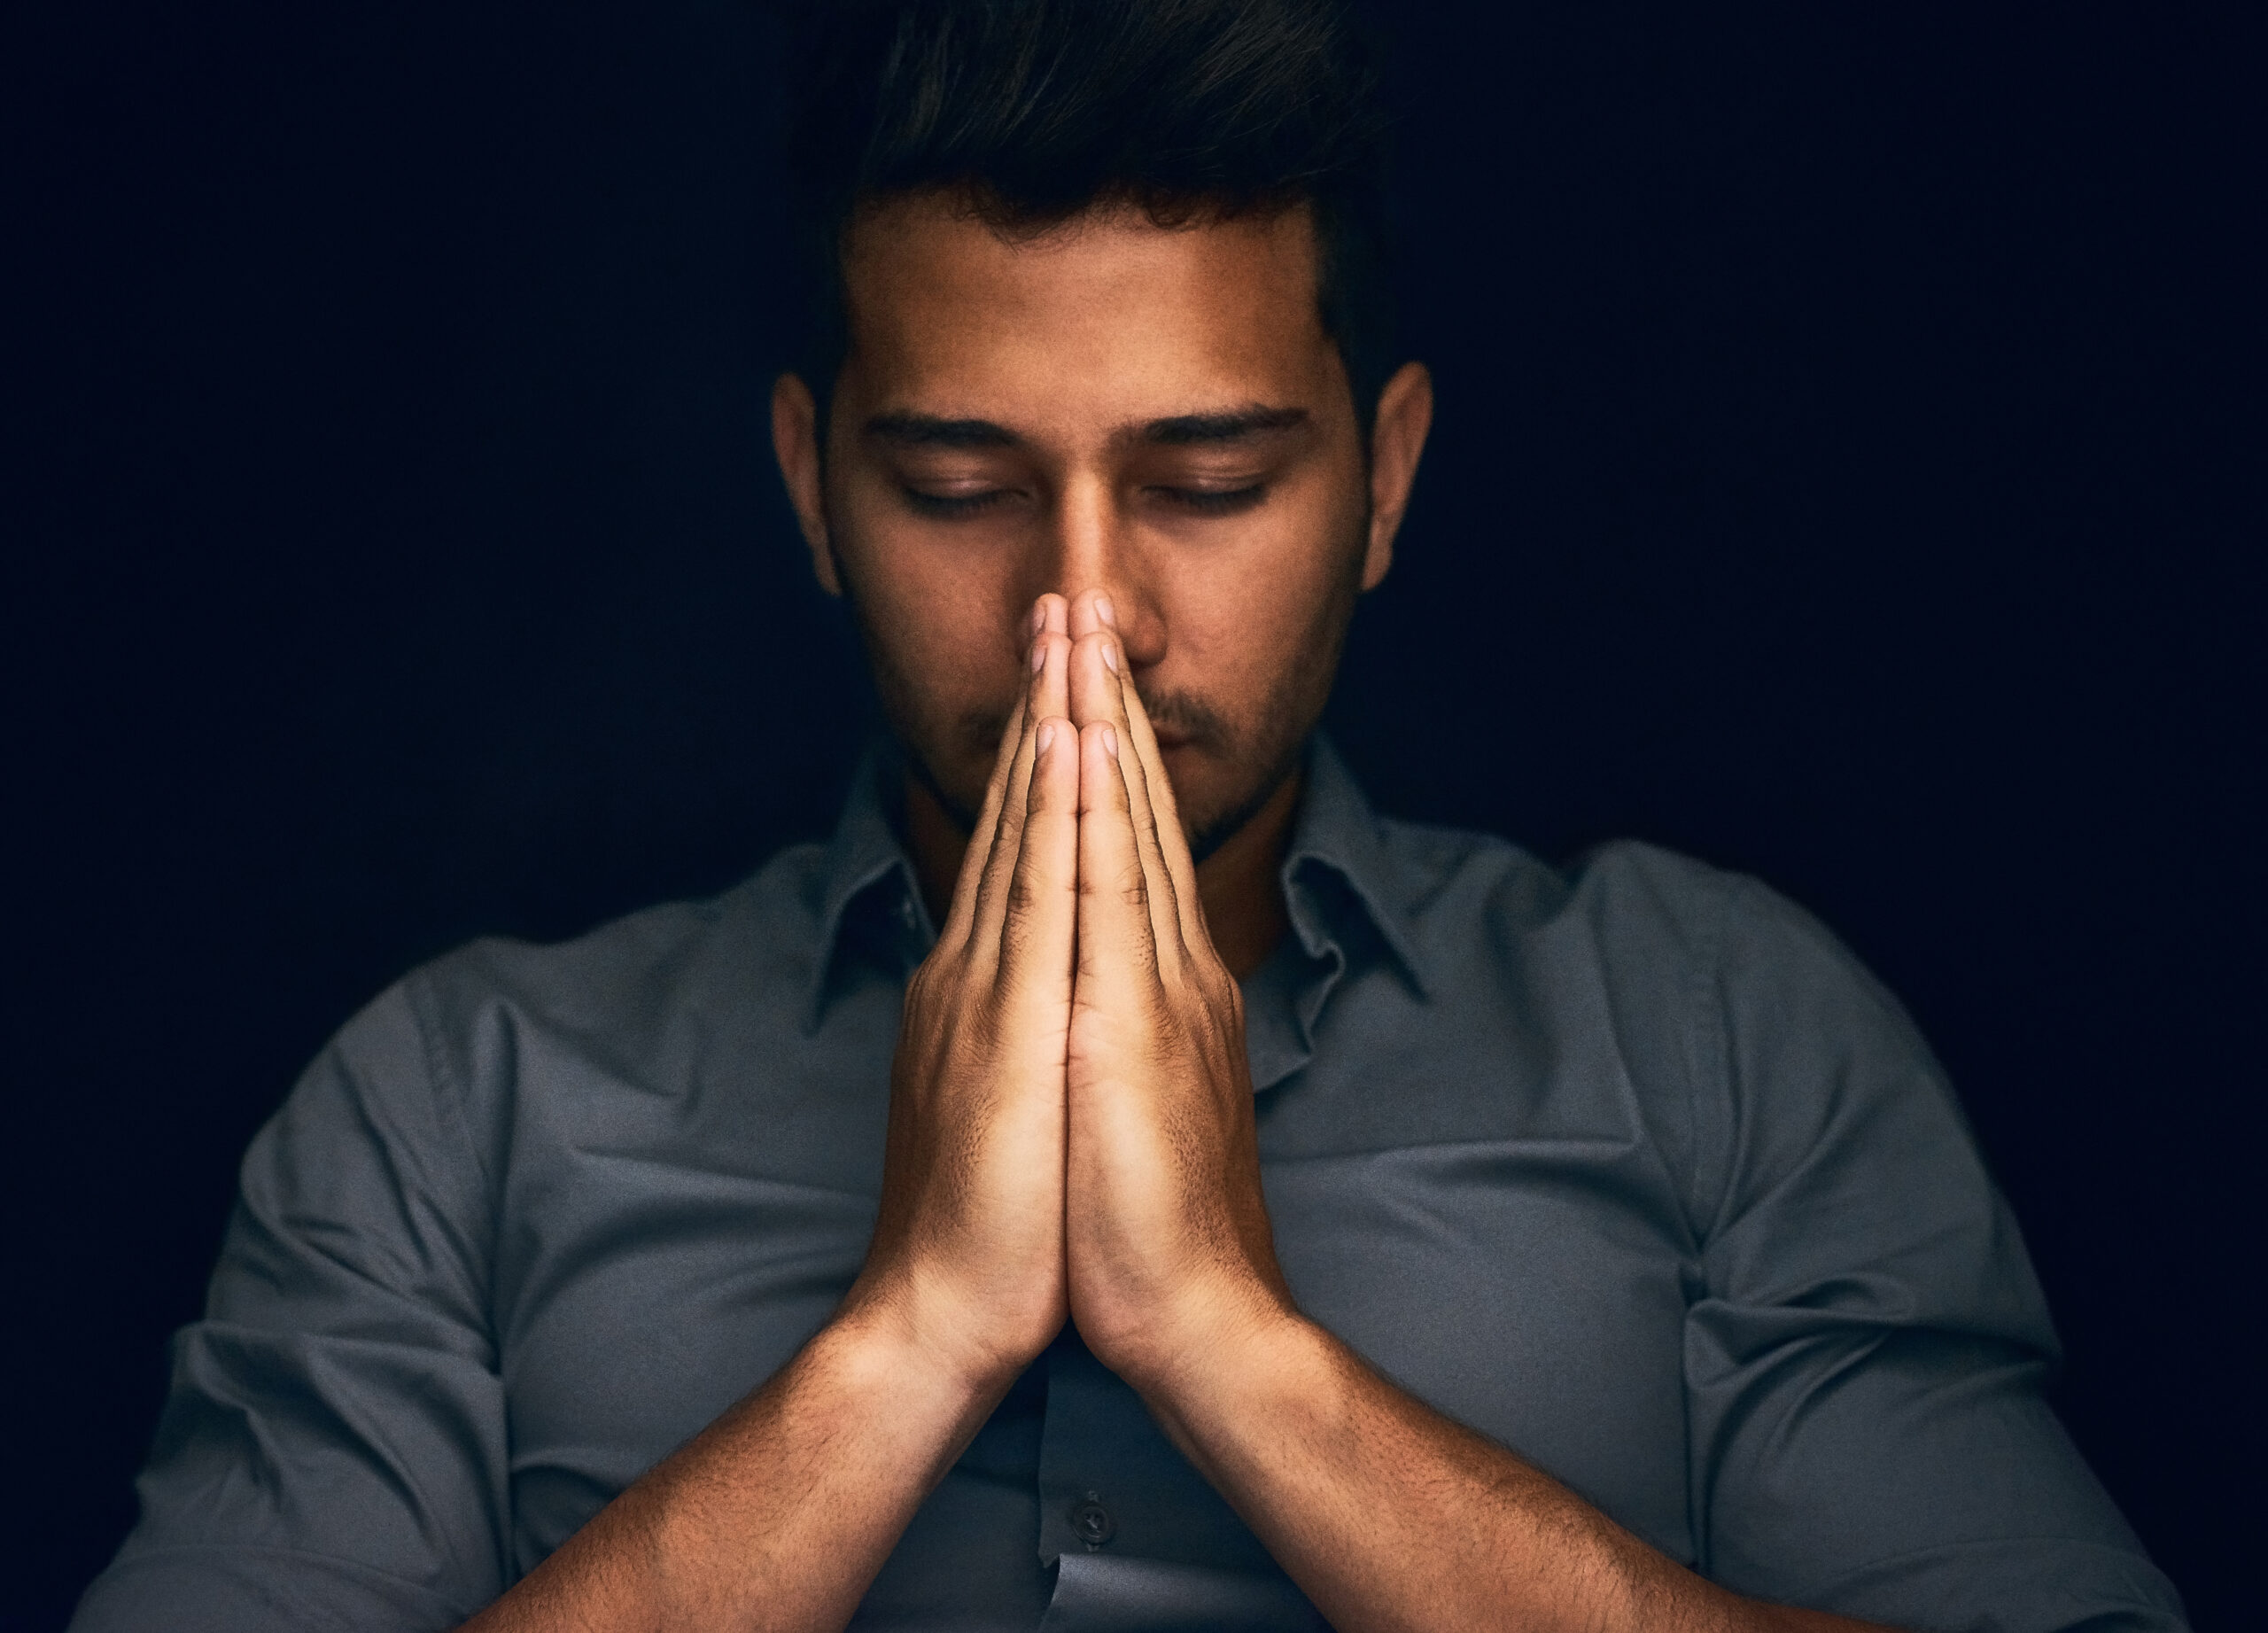 A man folds his hands in a prayer position. His eyes are closed. To heal your soul, you have to look within.